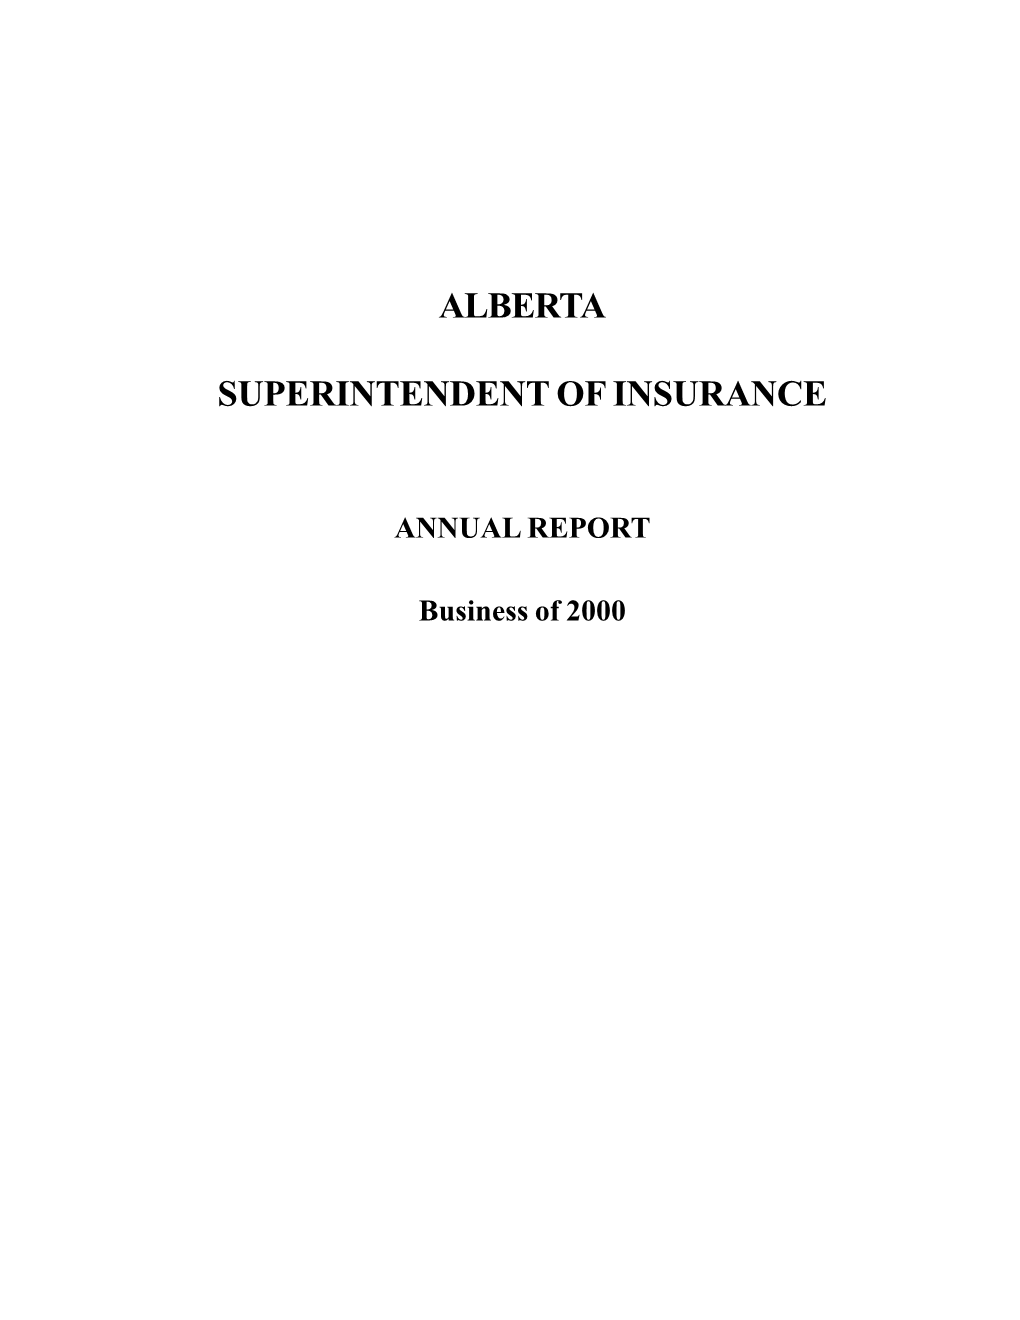 2000 Superintendent of Insurance Annual Report